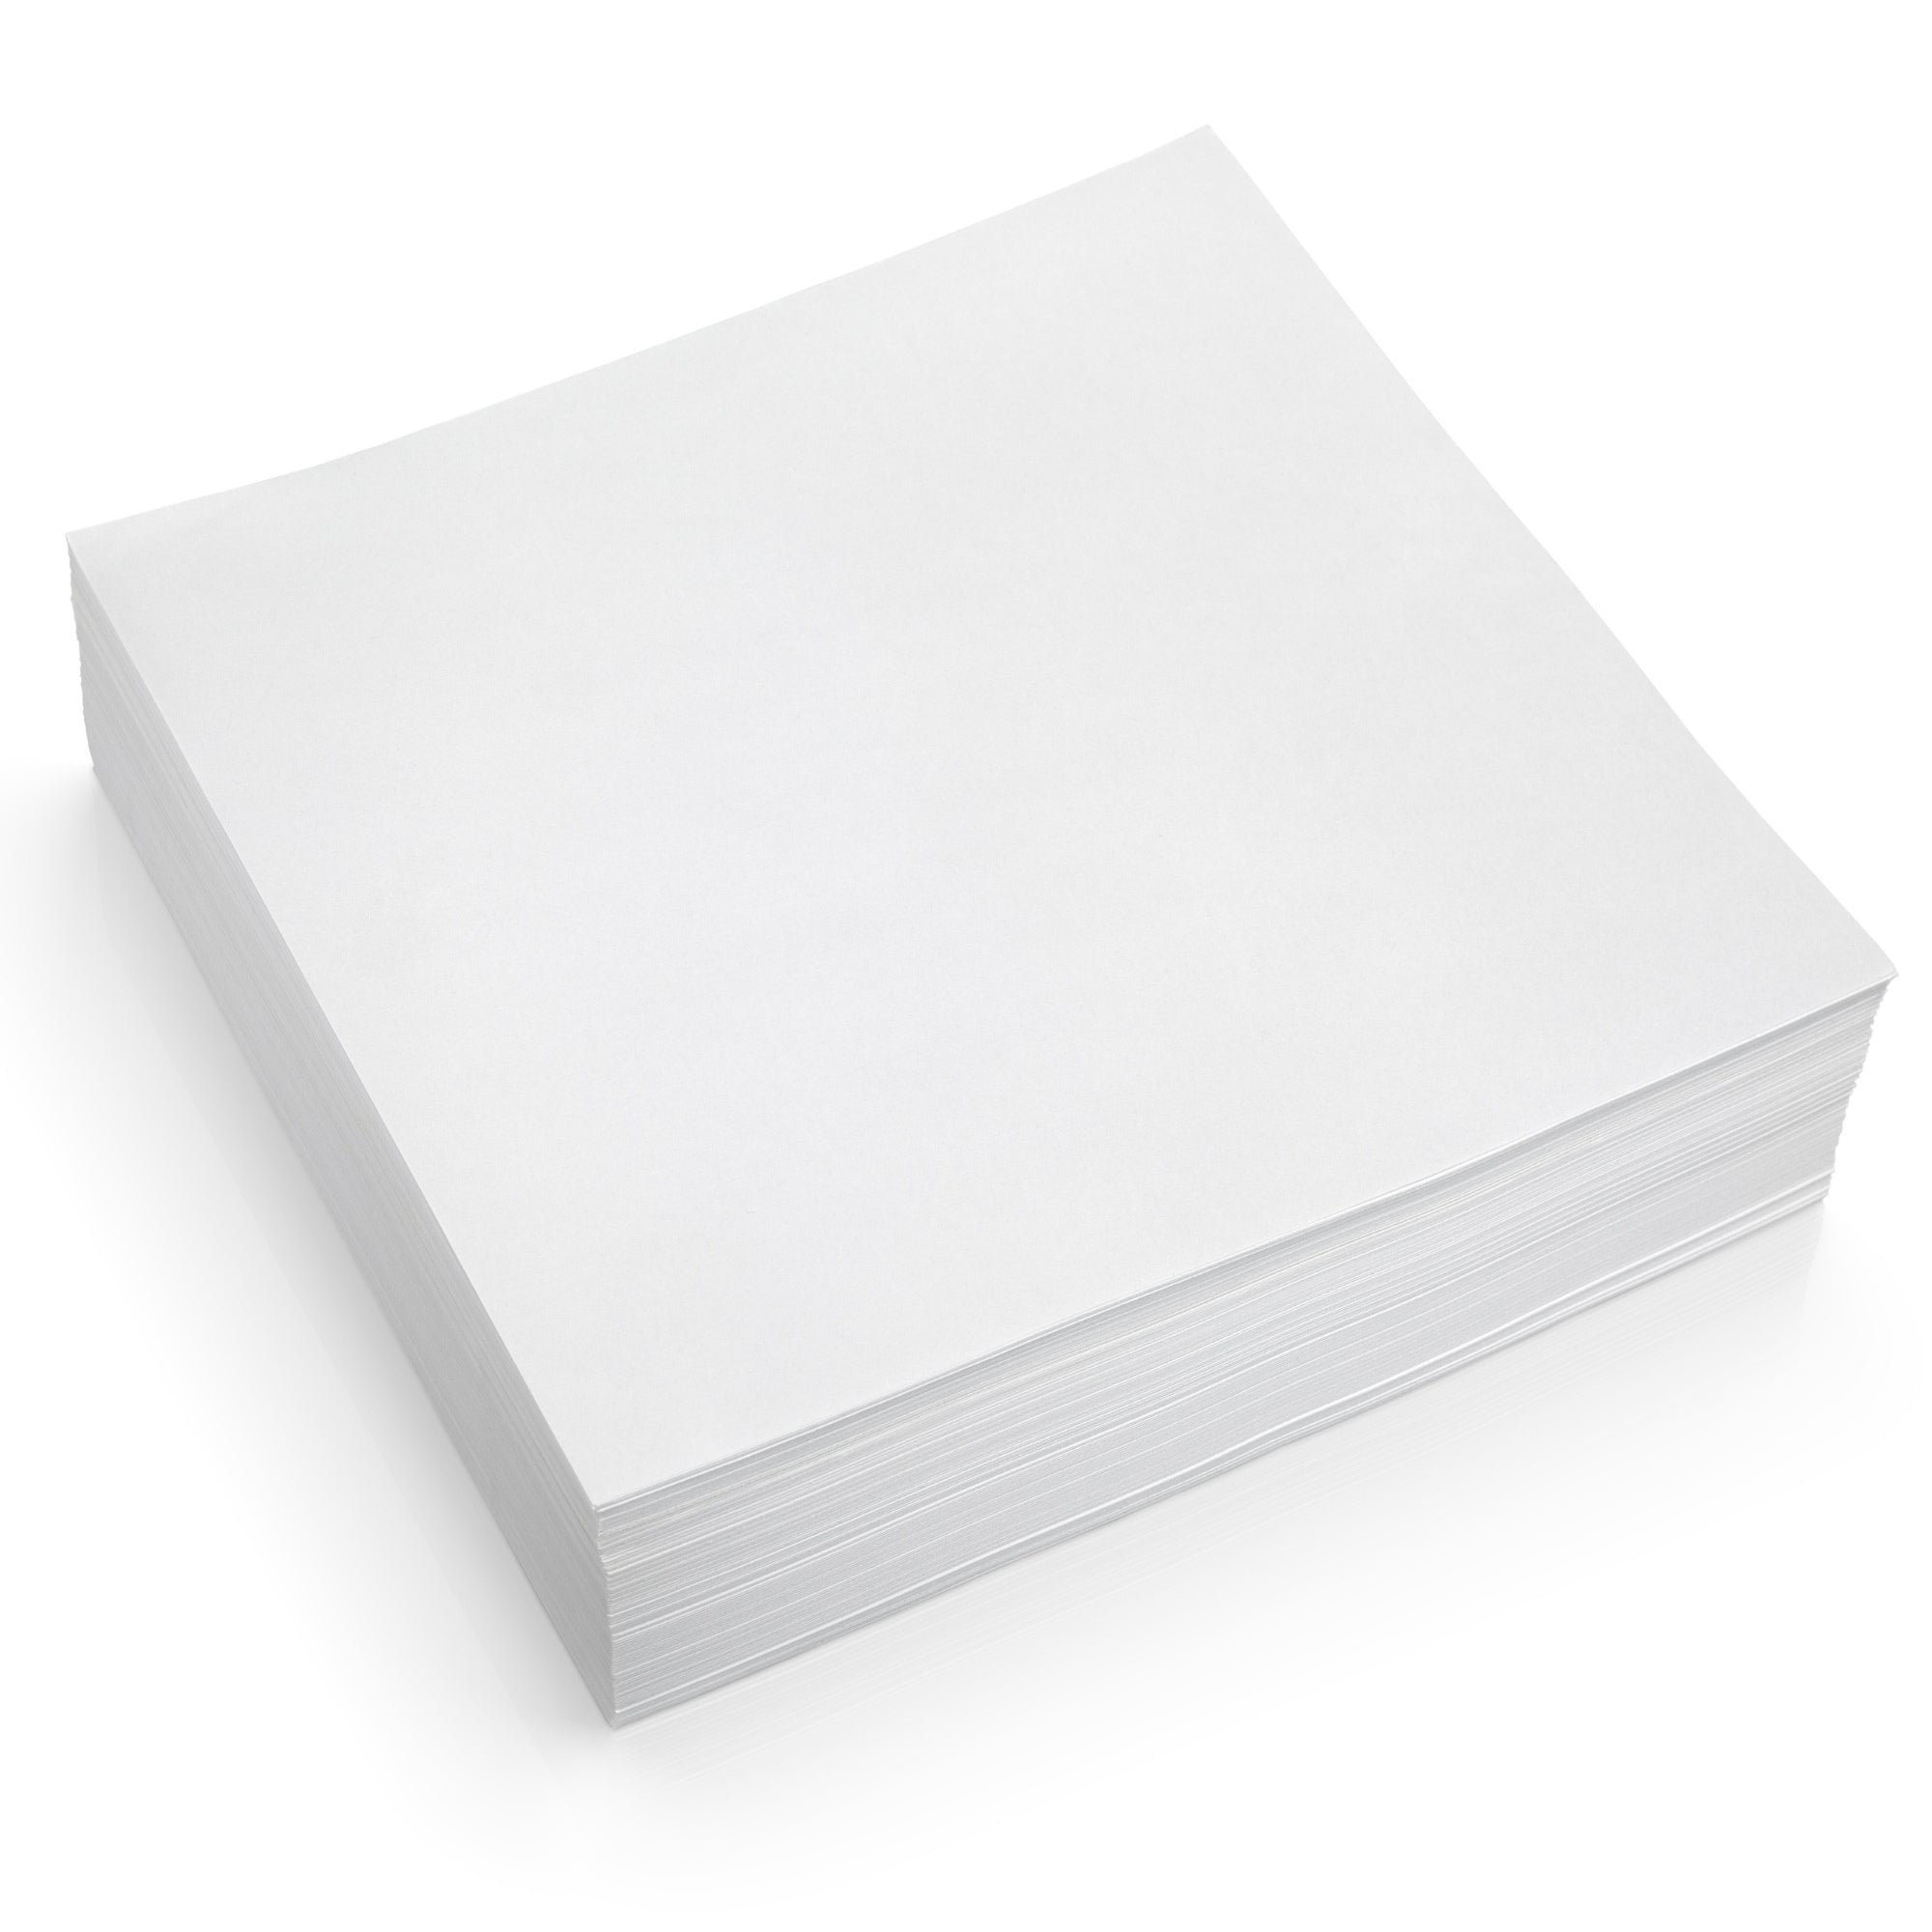 Custom Sized Butcher Paper Sheets for Sublimation and Heat Press Crafts,  White, Uncoated